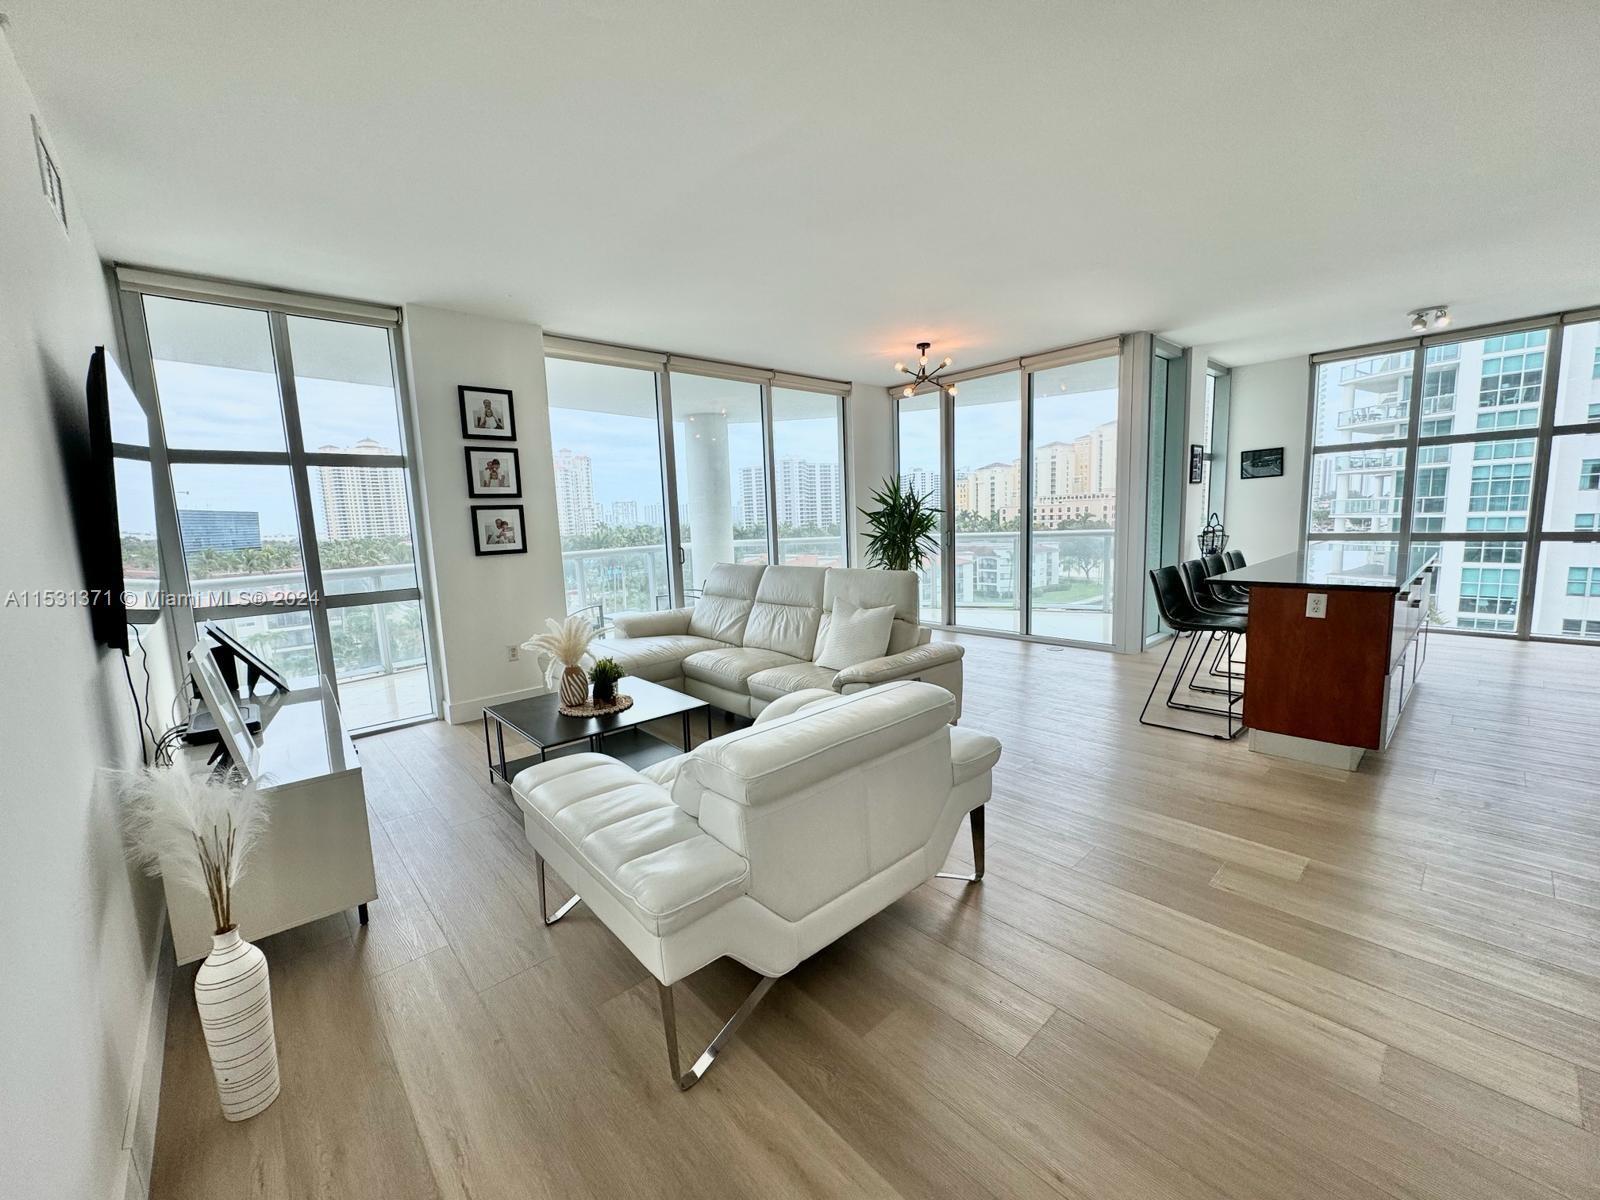 Stunning waterfront unit! This condo is the best unit and line in the building. With 3 beds and 2.5 